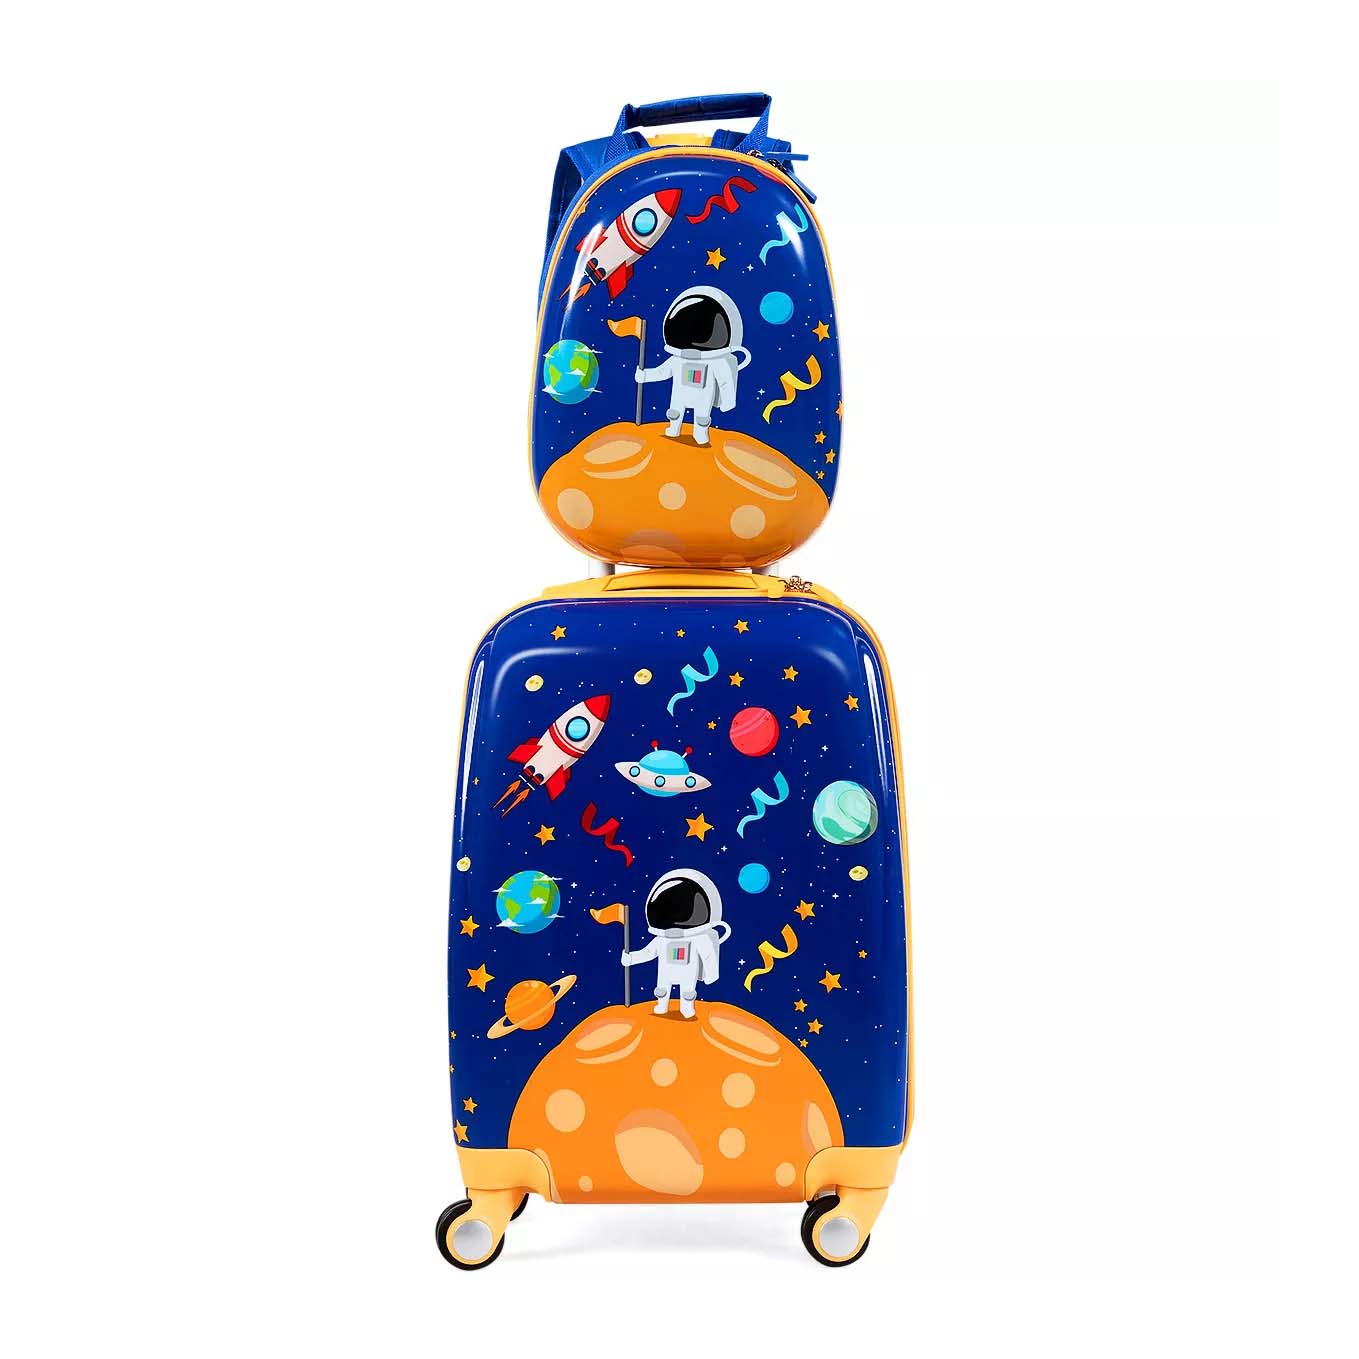 Costway 2PC Kids Luggage Set including a backpack and suitcase in an astronaut design